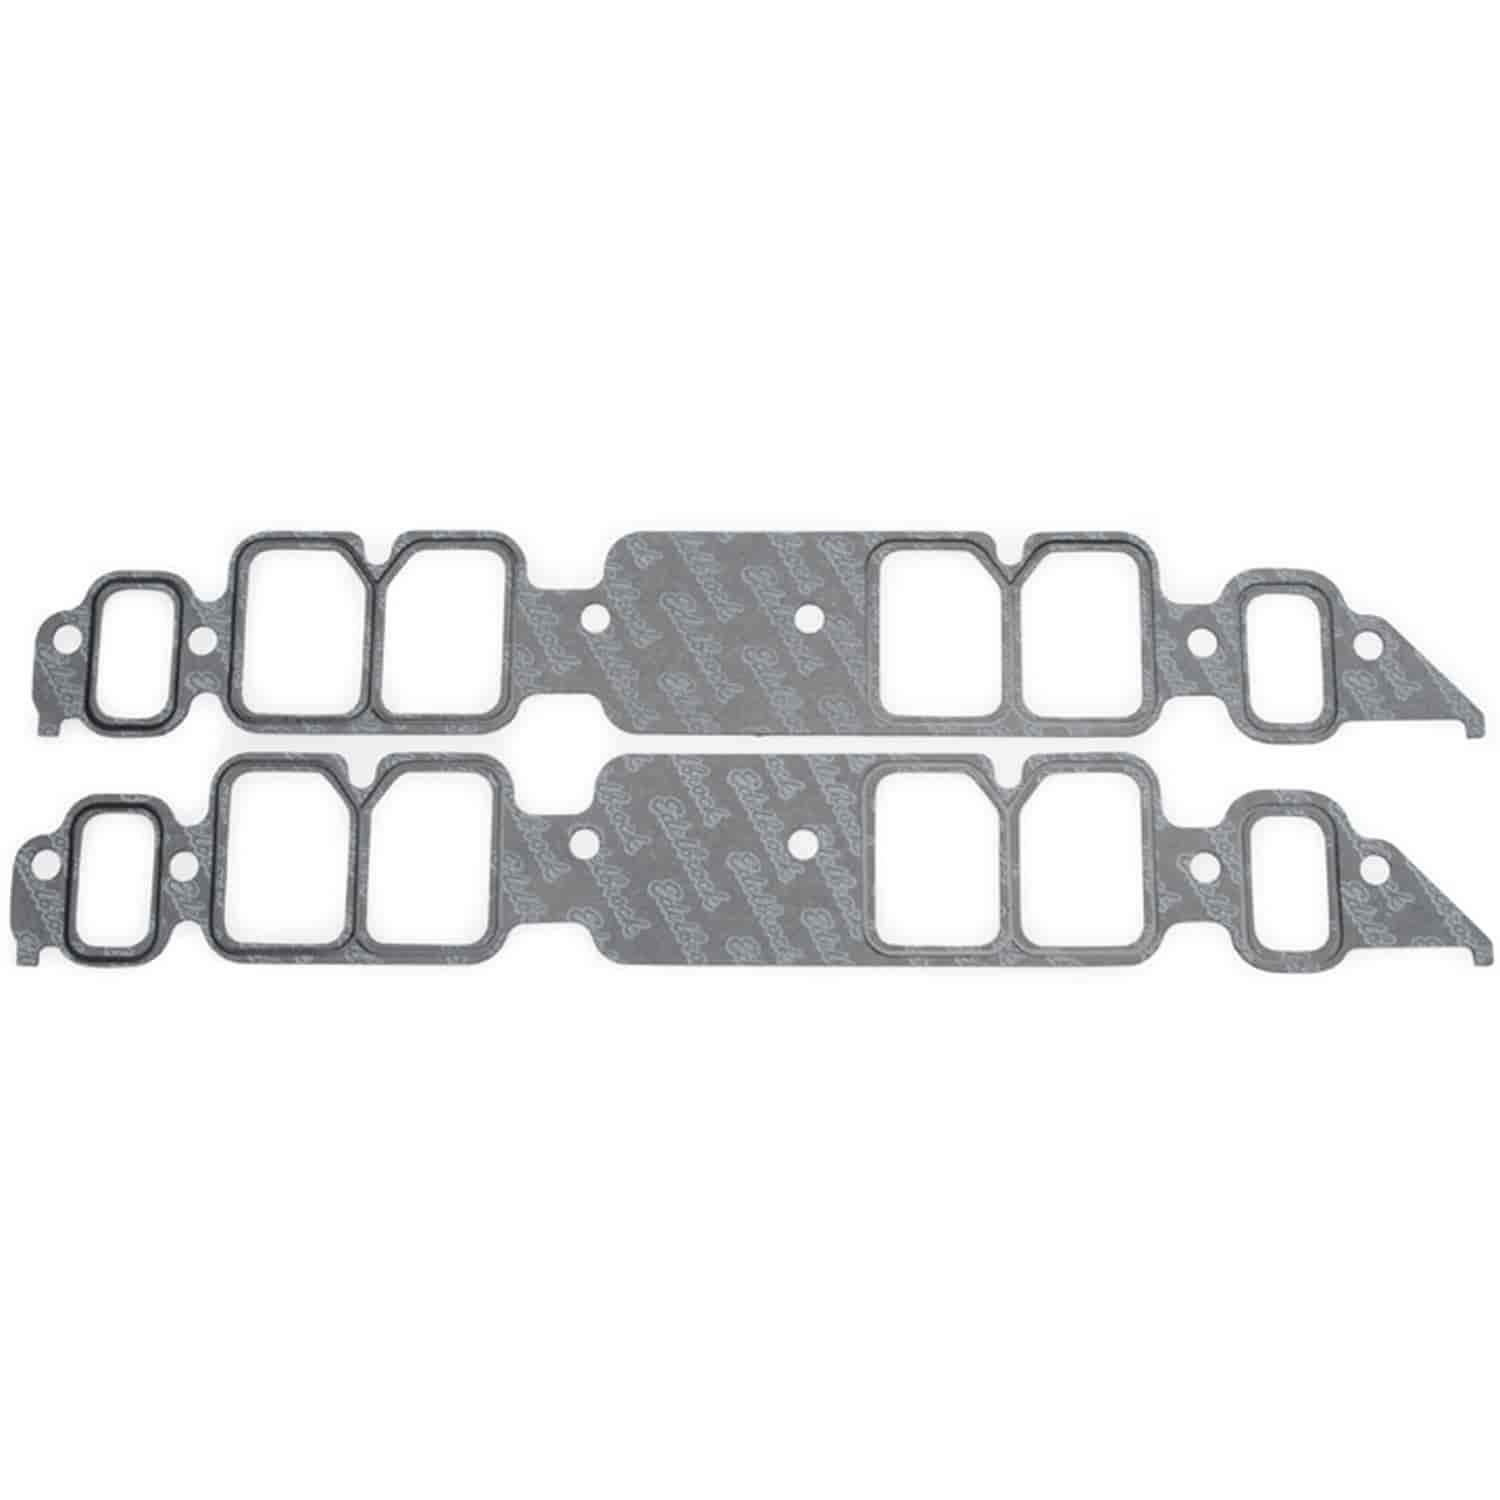 Intake Gaskets for Rectangle Port Big Block Chevy 396-454